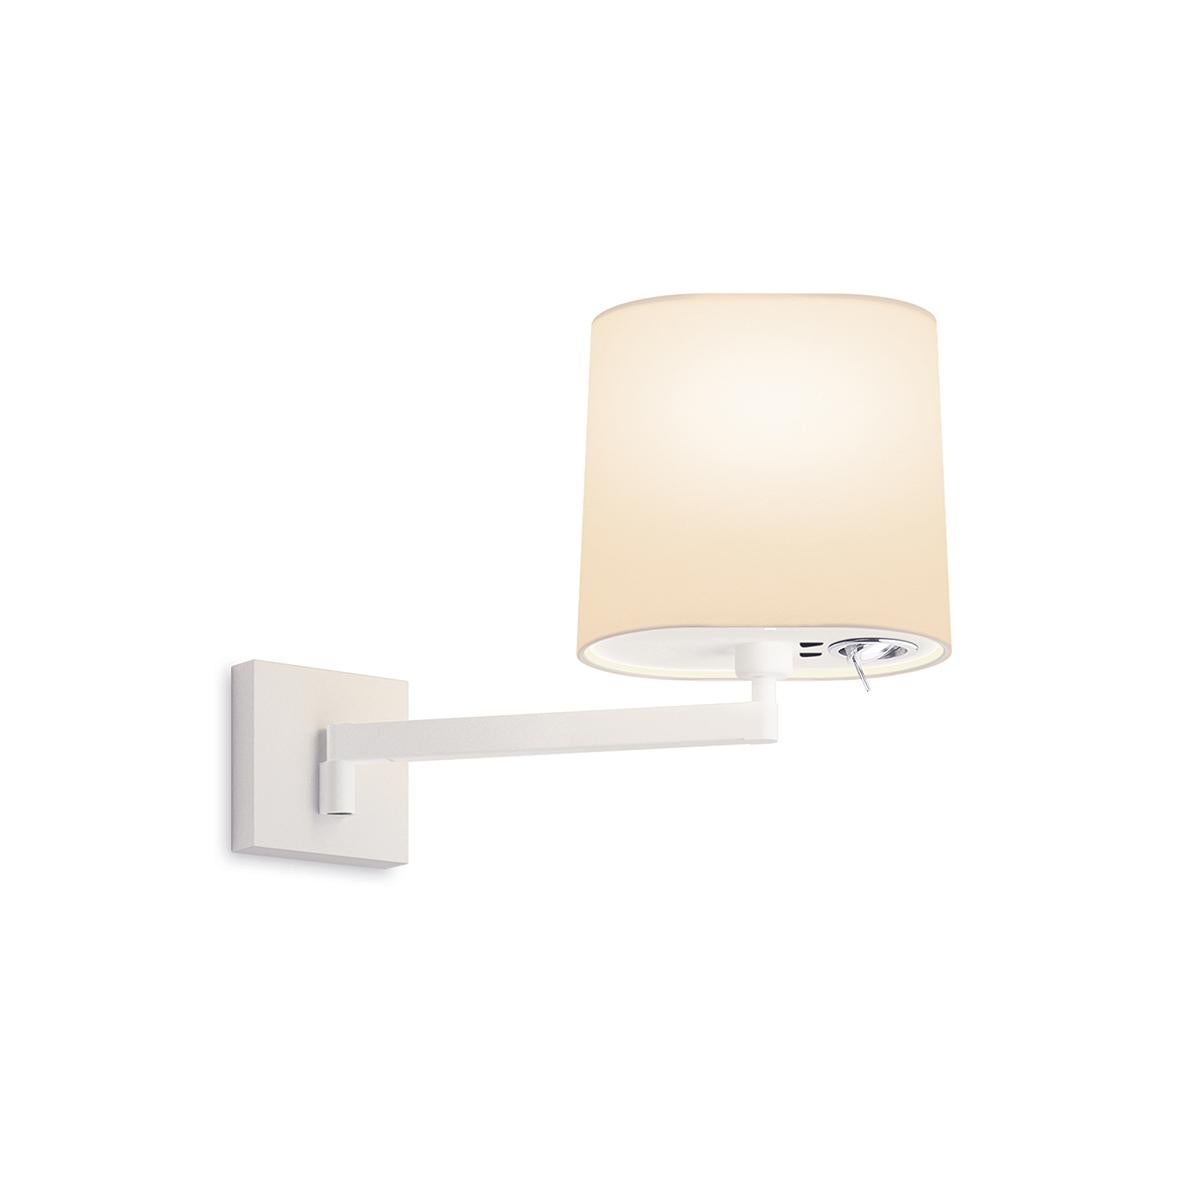 The Swing wall sconce collection was updated to feature a new, clean look, as well as 2 new finishes. Each member of this family possesses a jointed arm allowing for a wide 180° range of motion for directional ambient illumination. Reference 0514